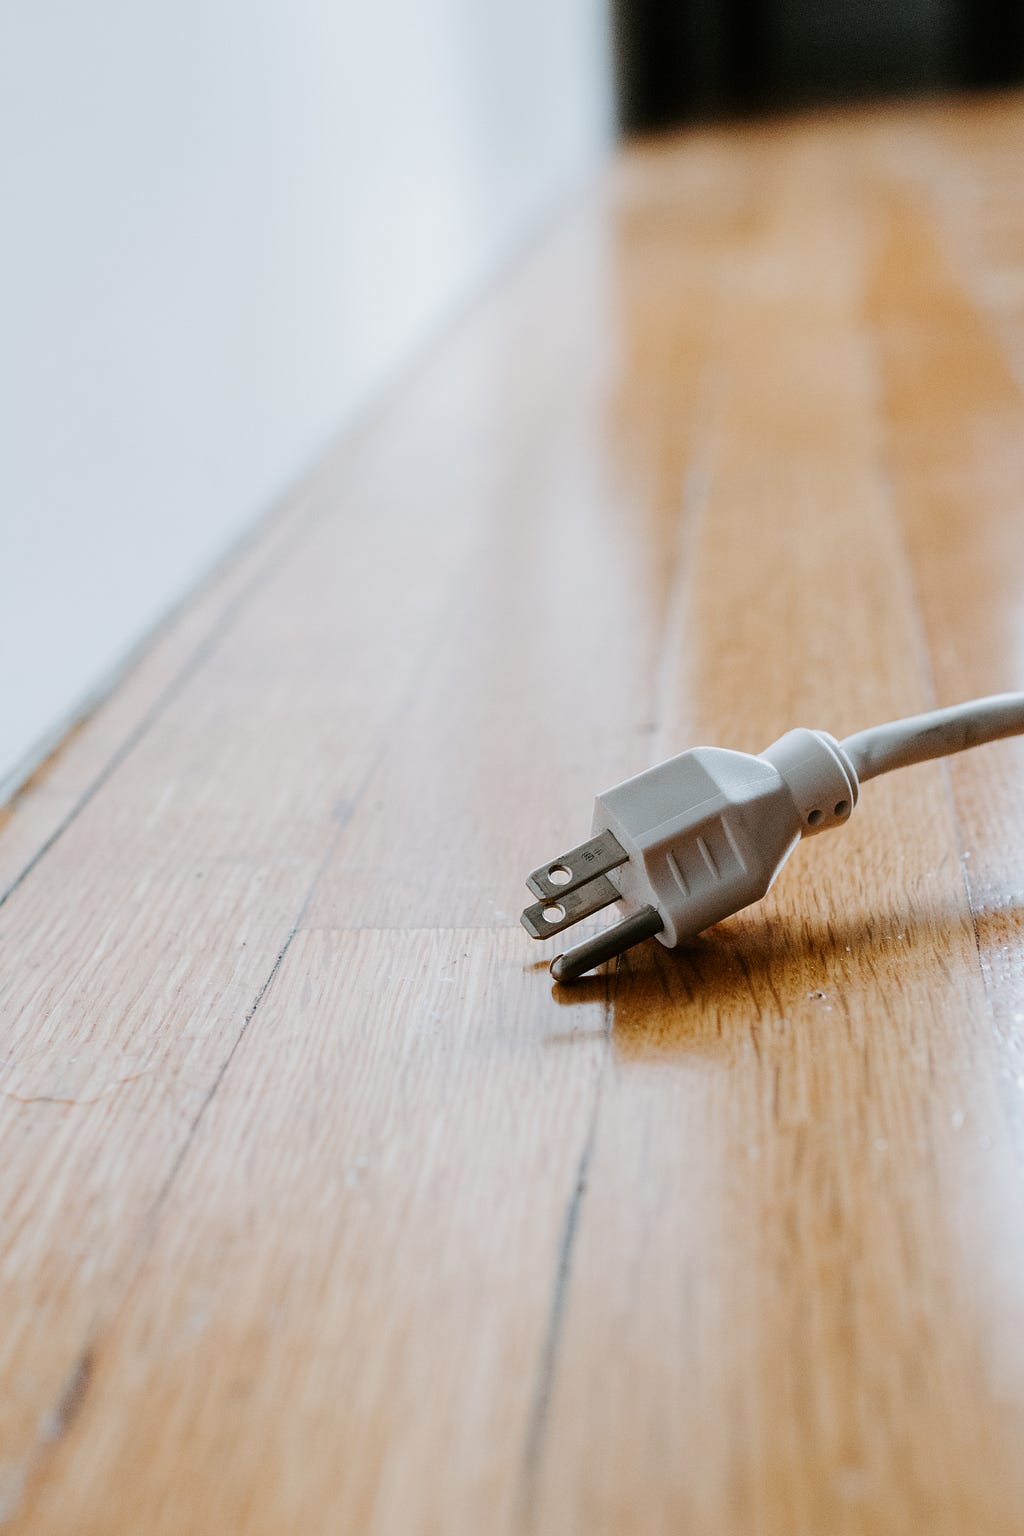 a white plug on a wooden floor